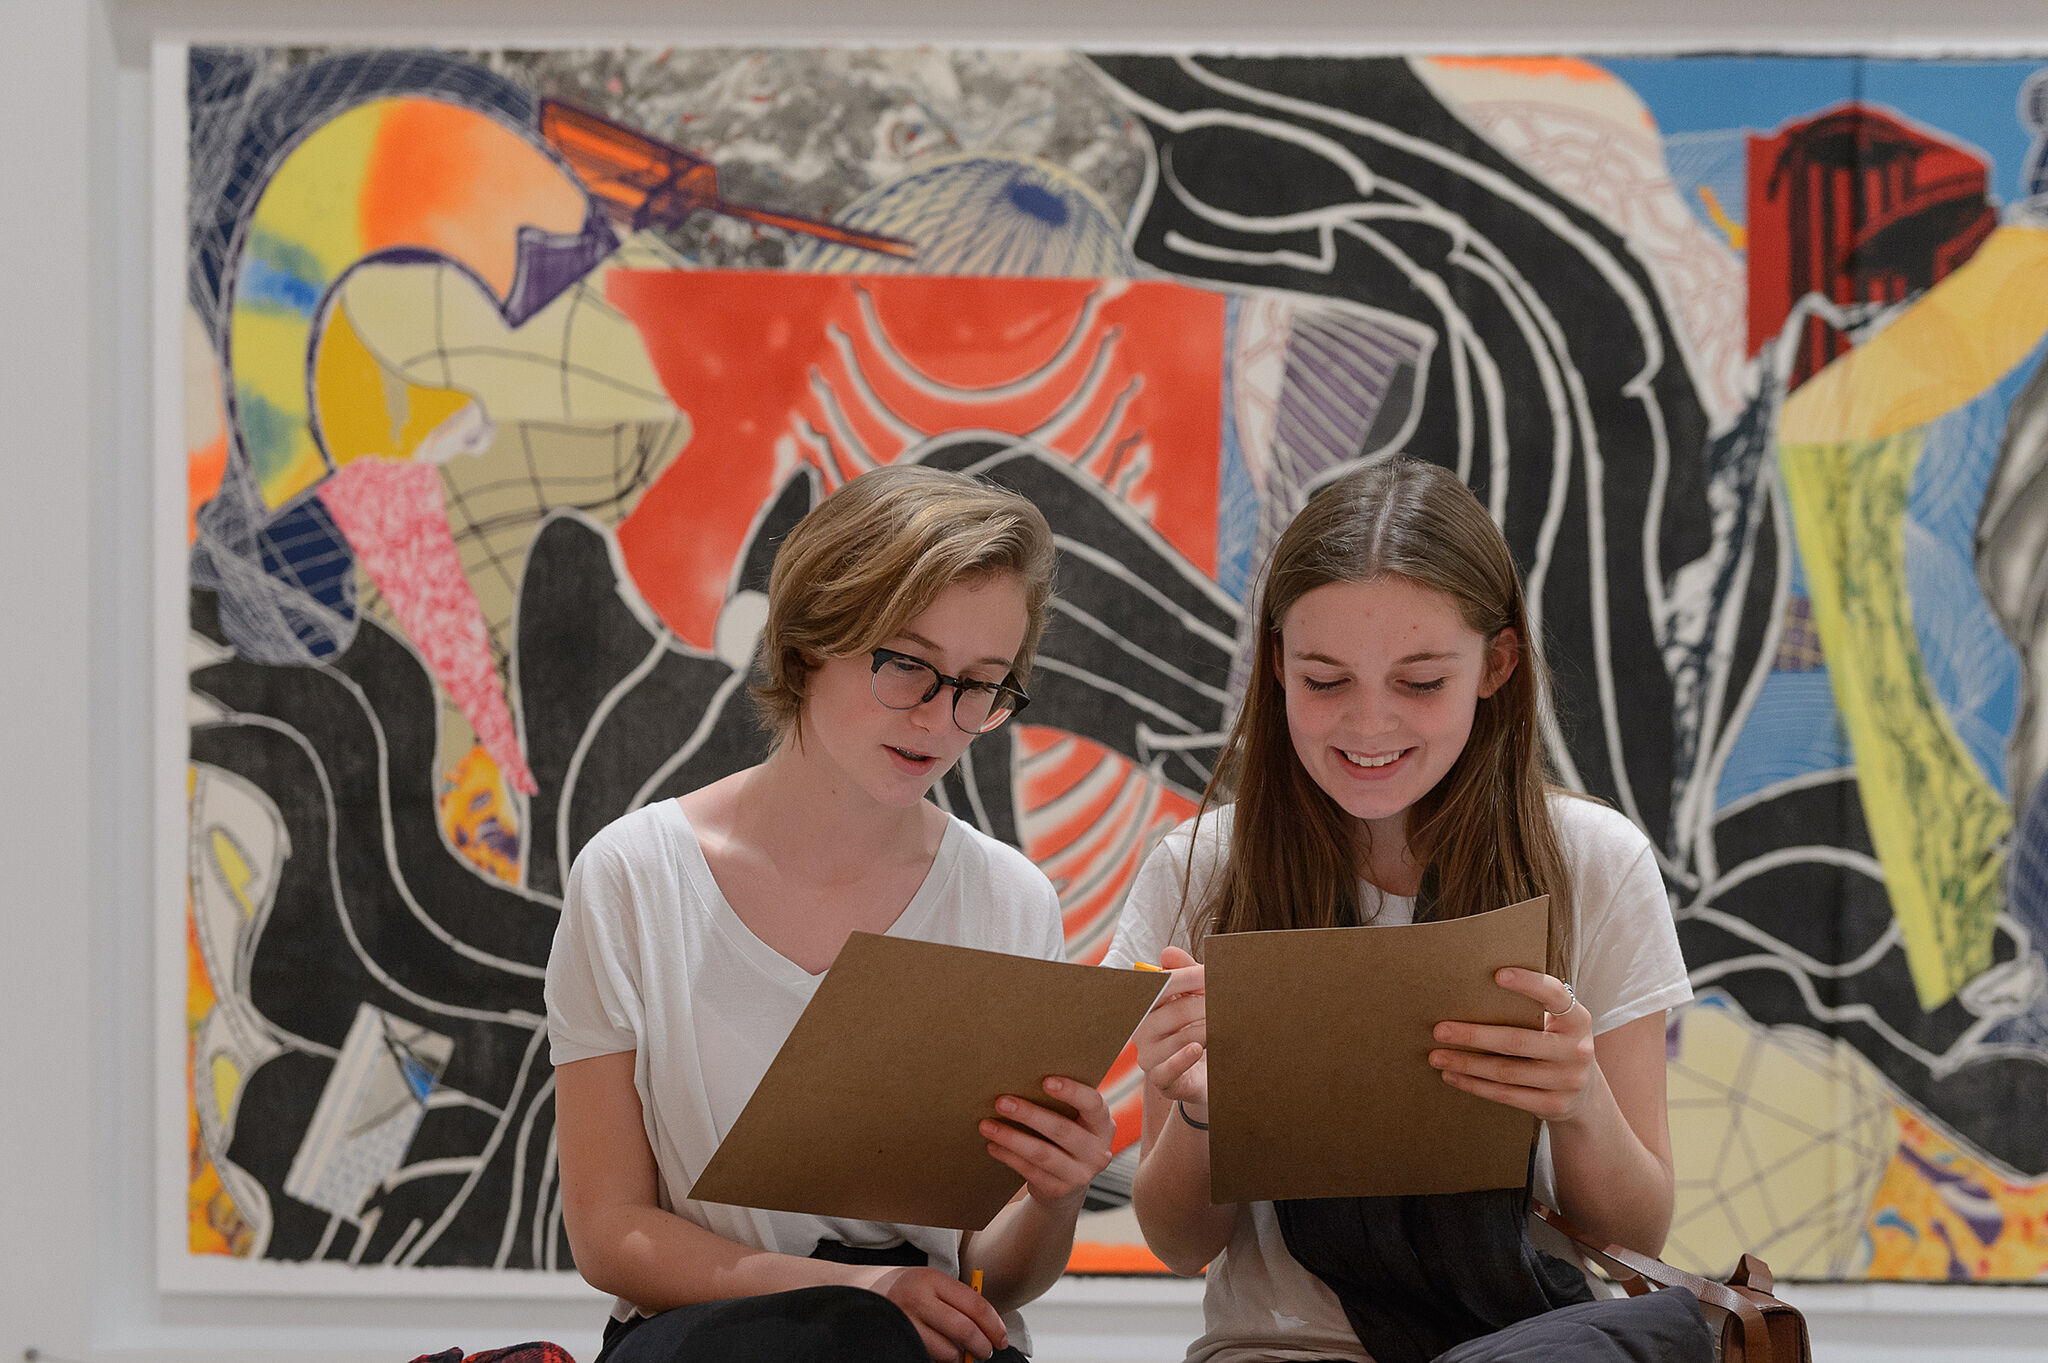 Two girls work on an art project in the Frank Stella exhibition.